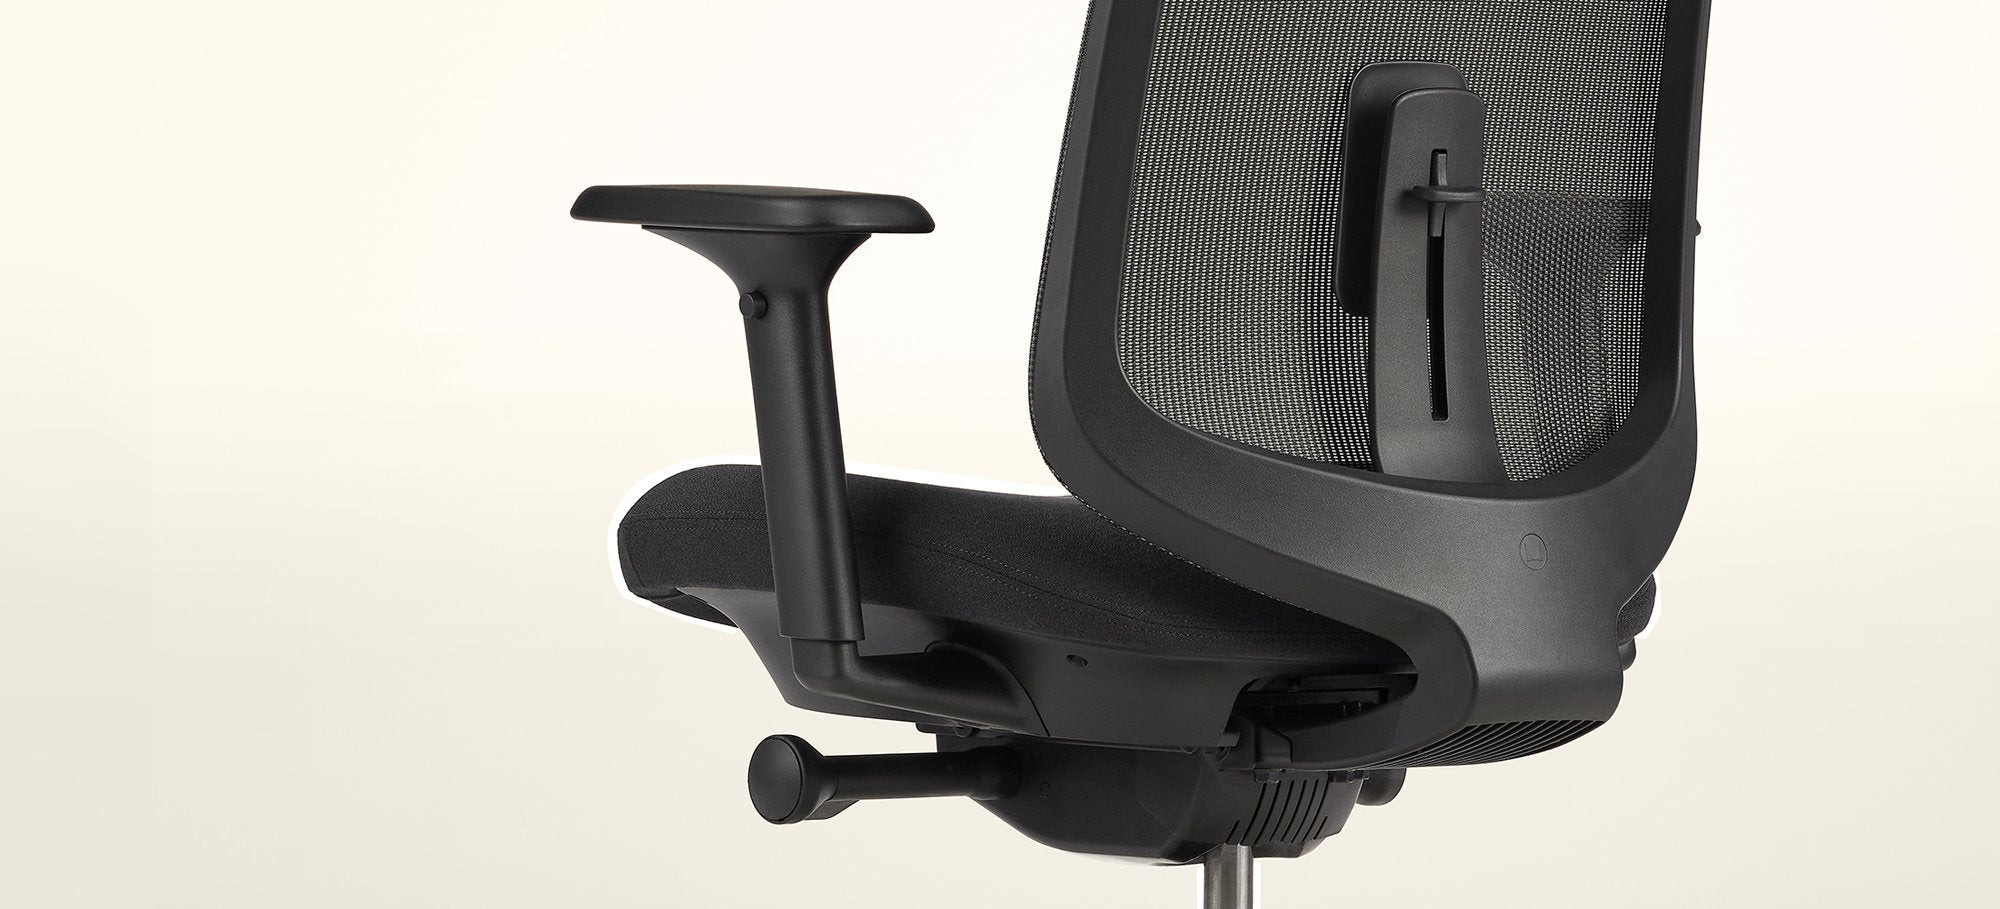 Verus Office Chair features